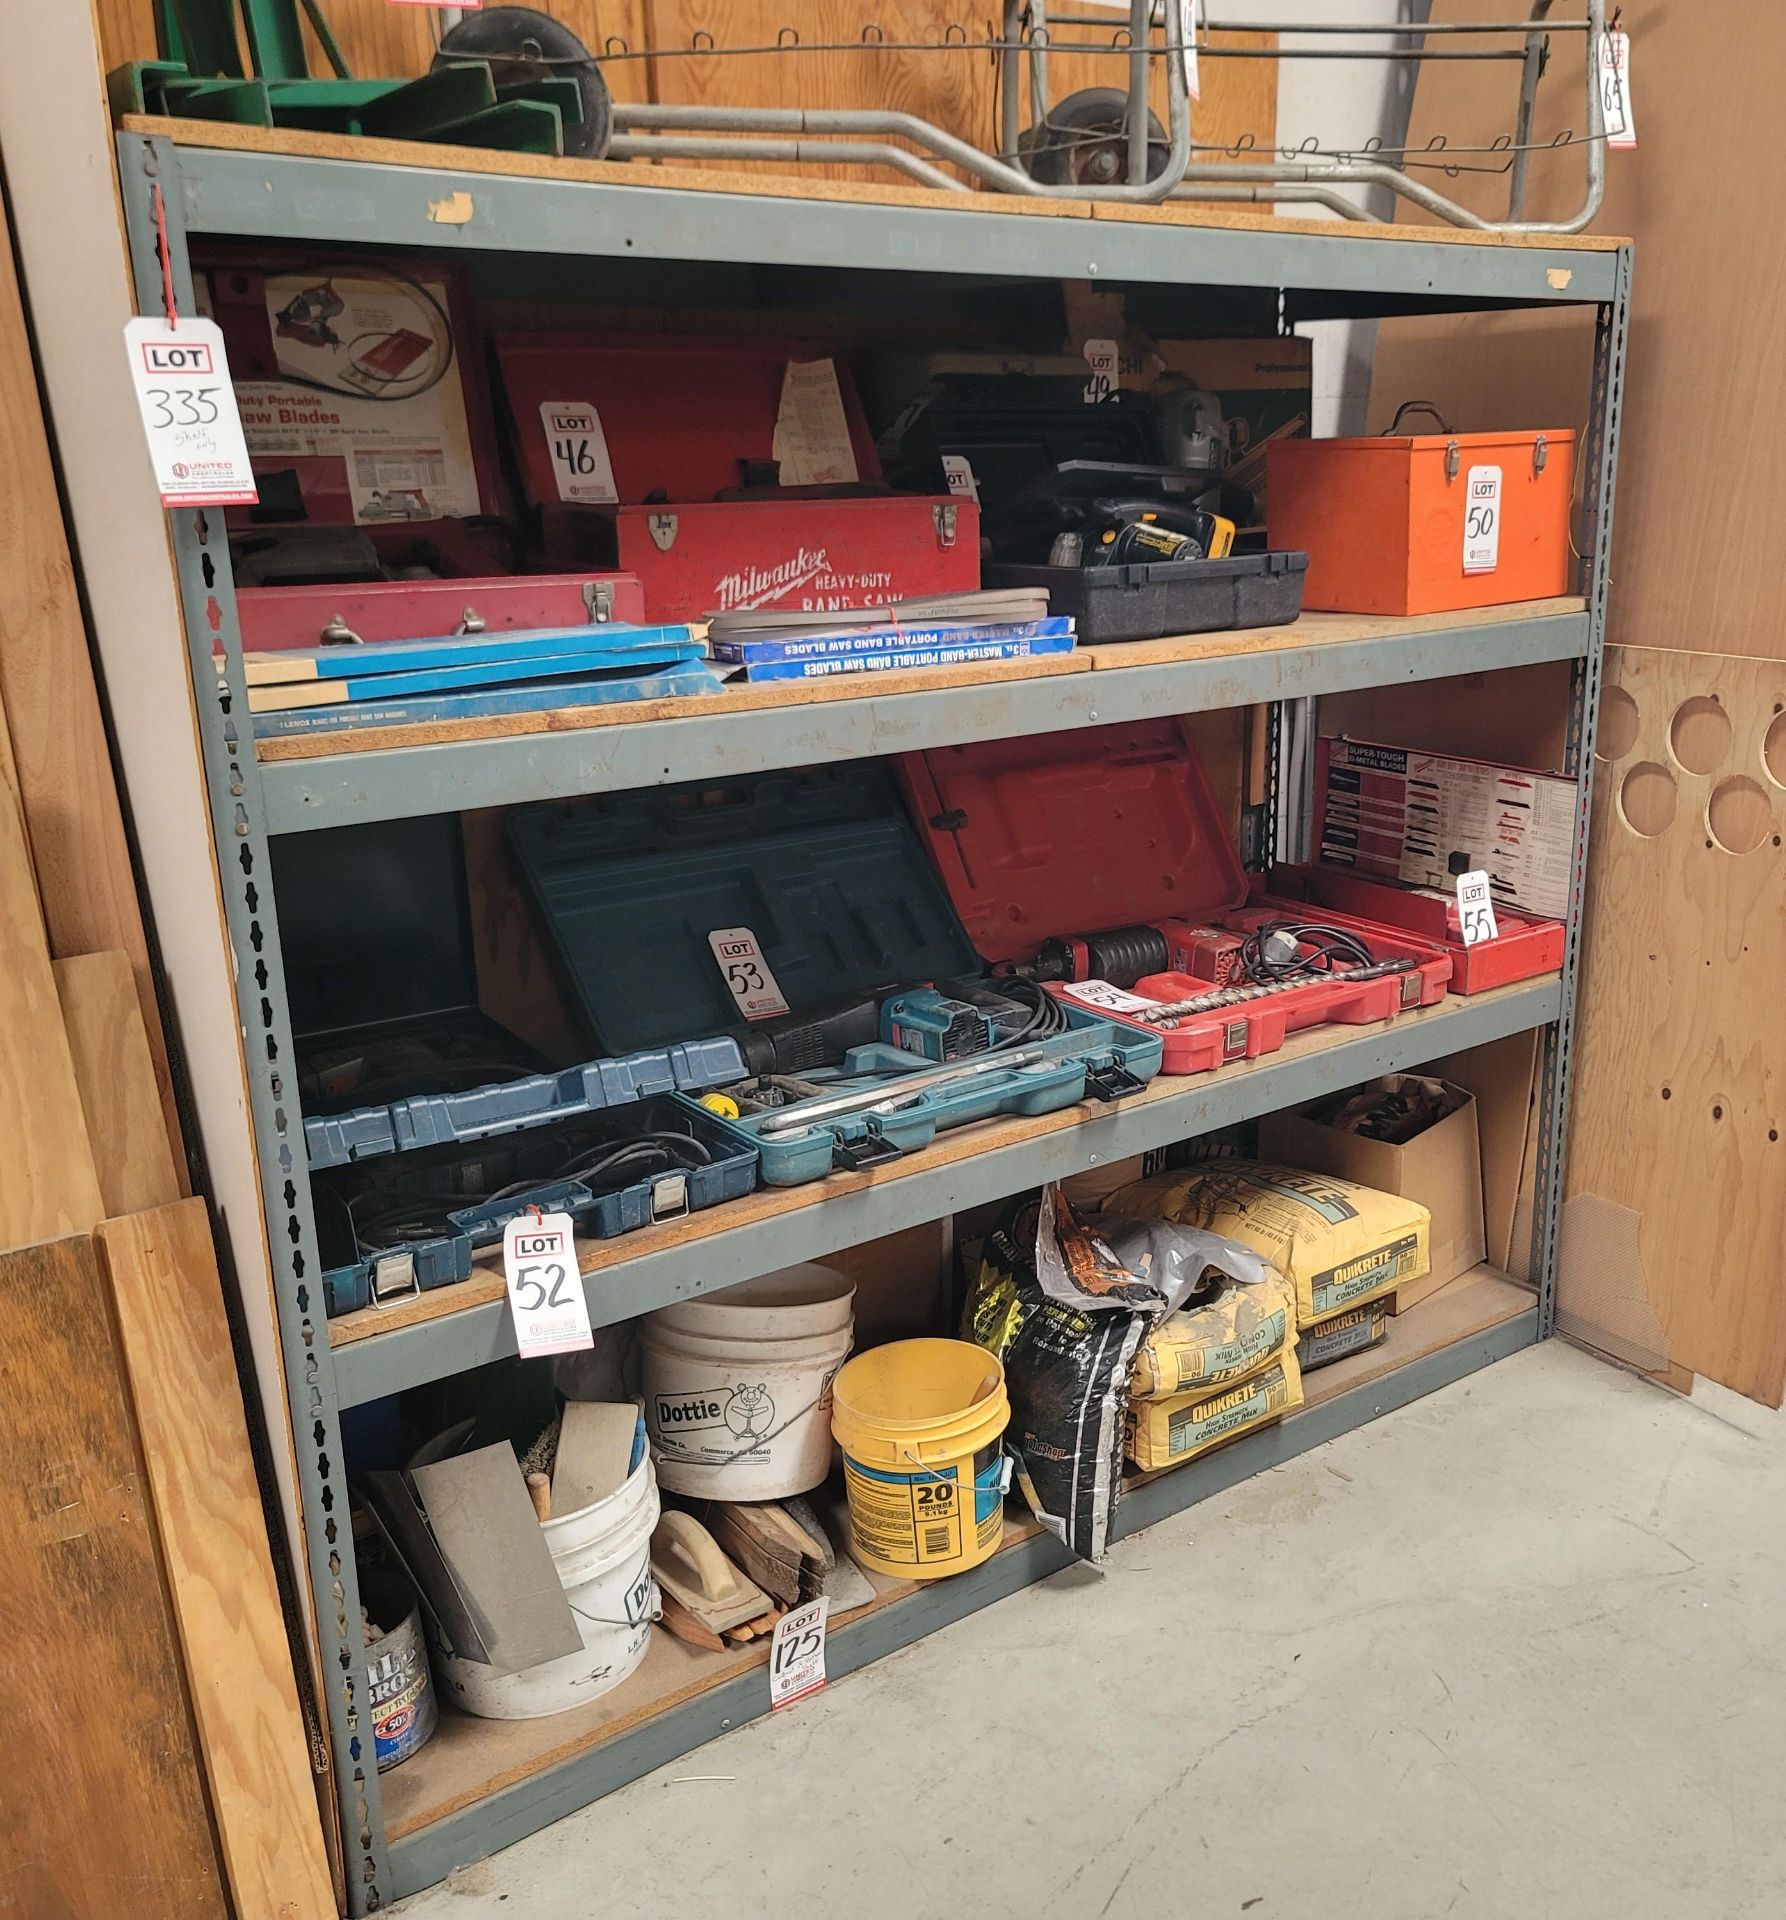 SHELF UNIT W/ PARTICLE BOARD SHELVES, 7' X 30" X 6', CONTENTS NOT INCLUDED, (DELAYED PICKUP UNTIL